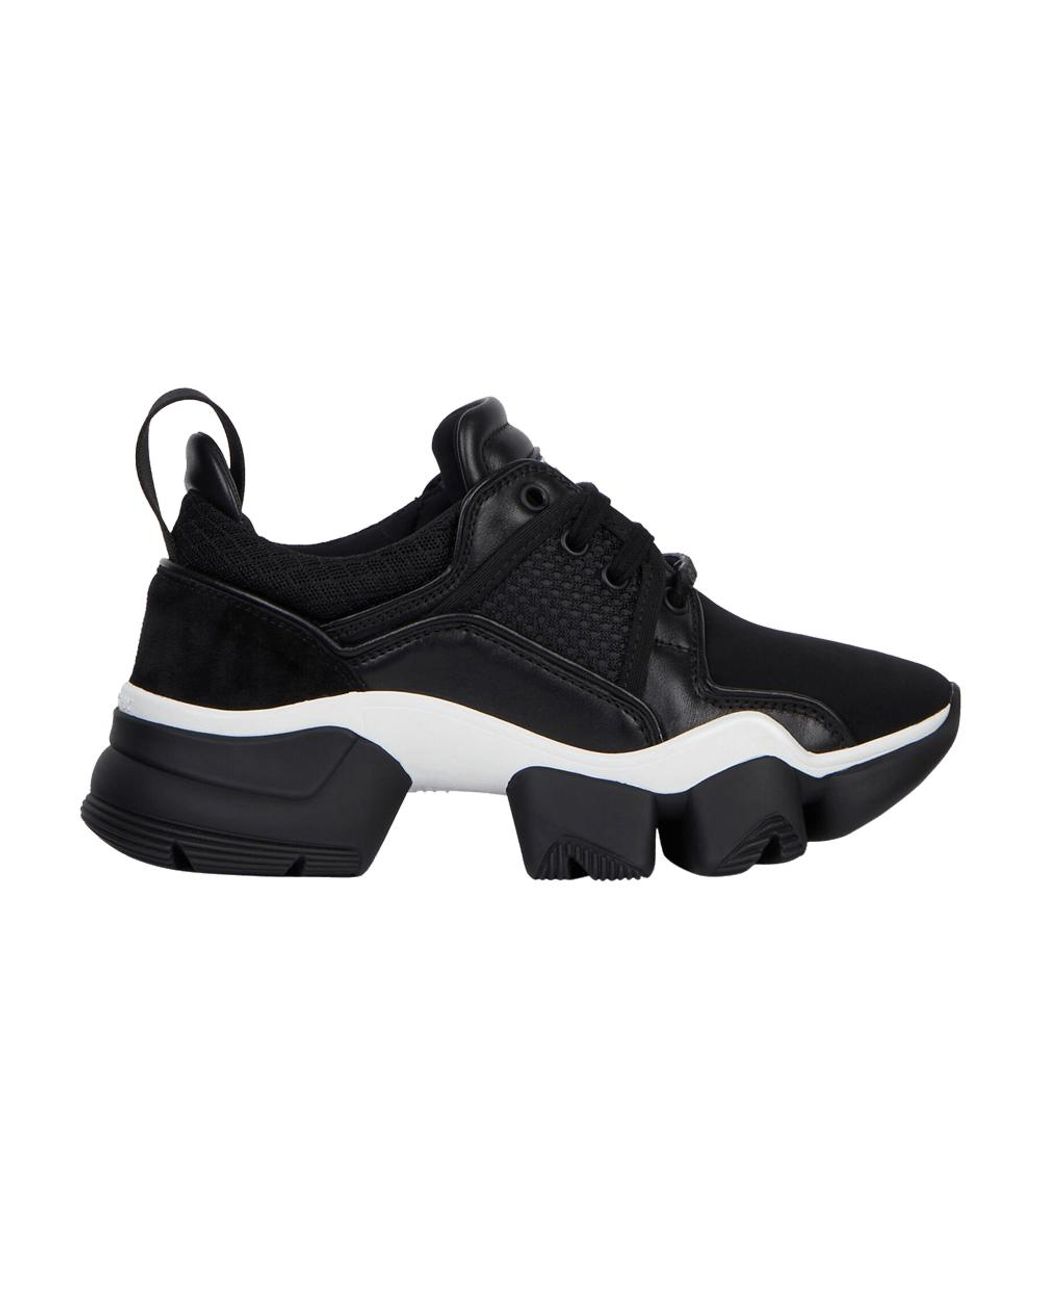 Givenchy Jaw Low 'black' | Lyst